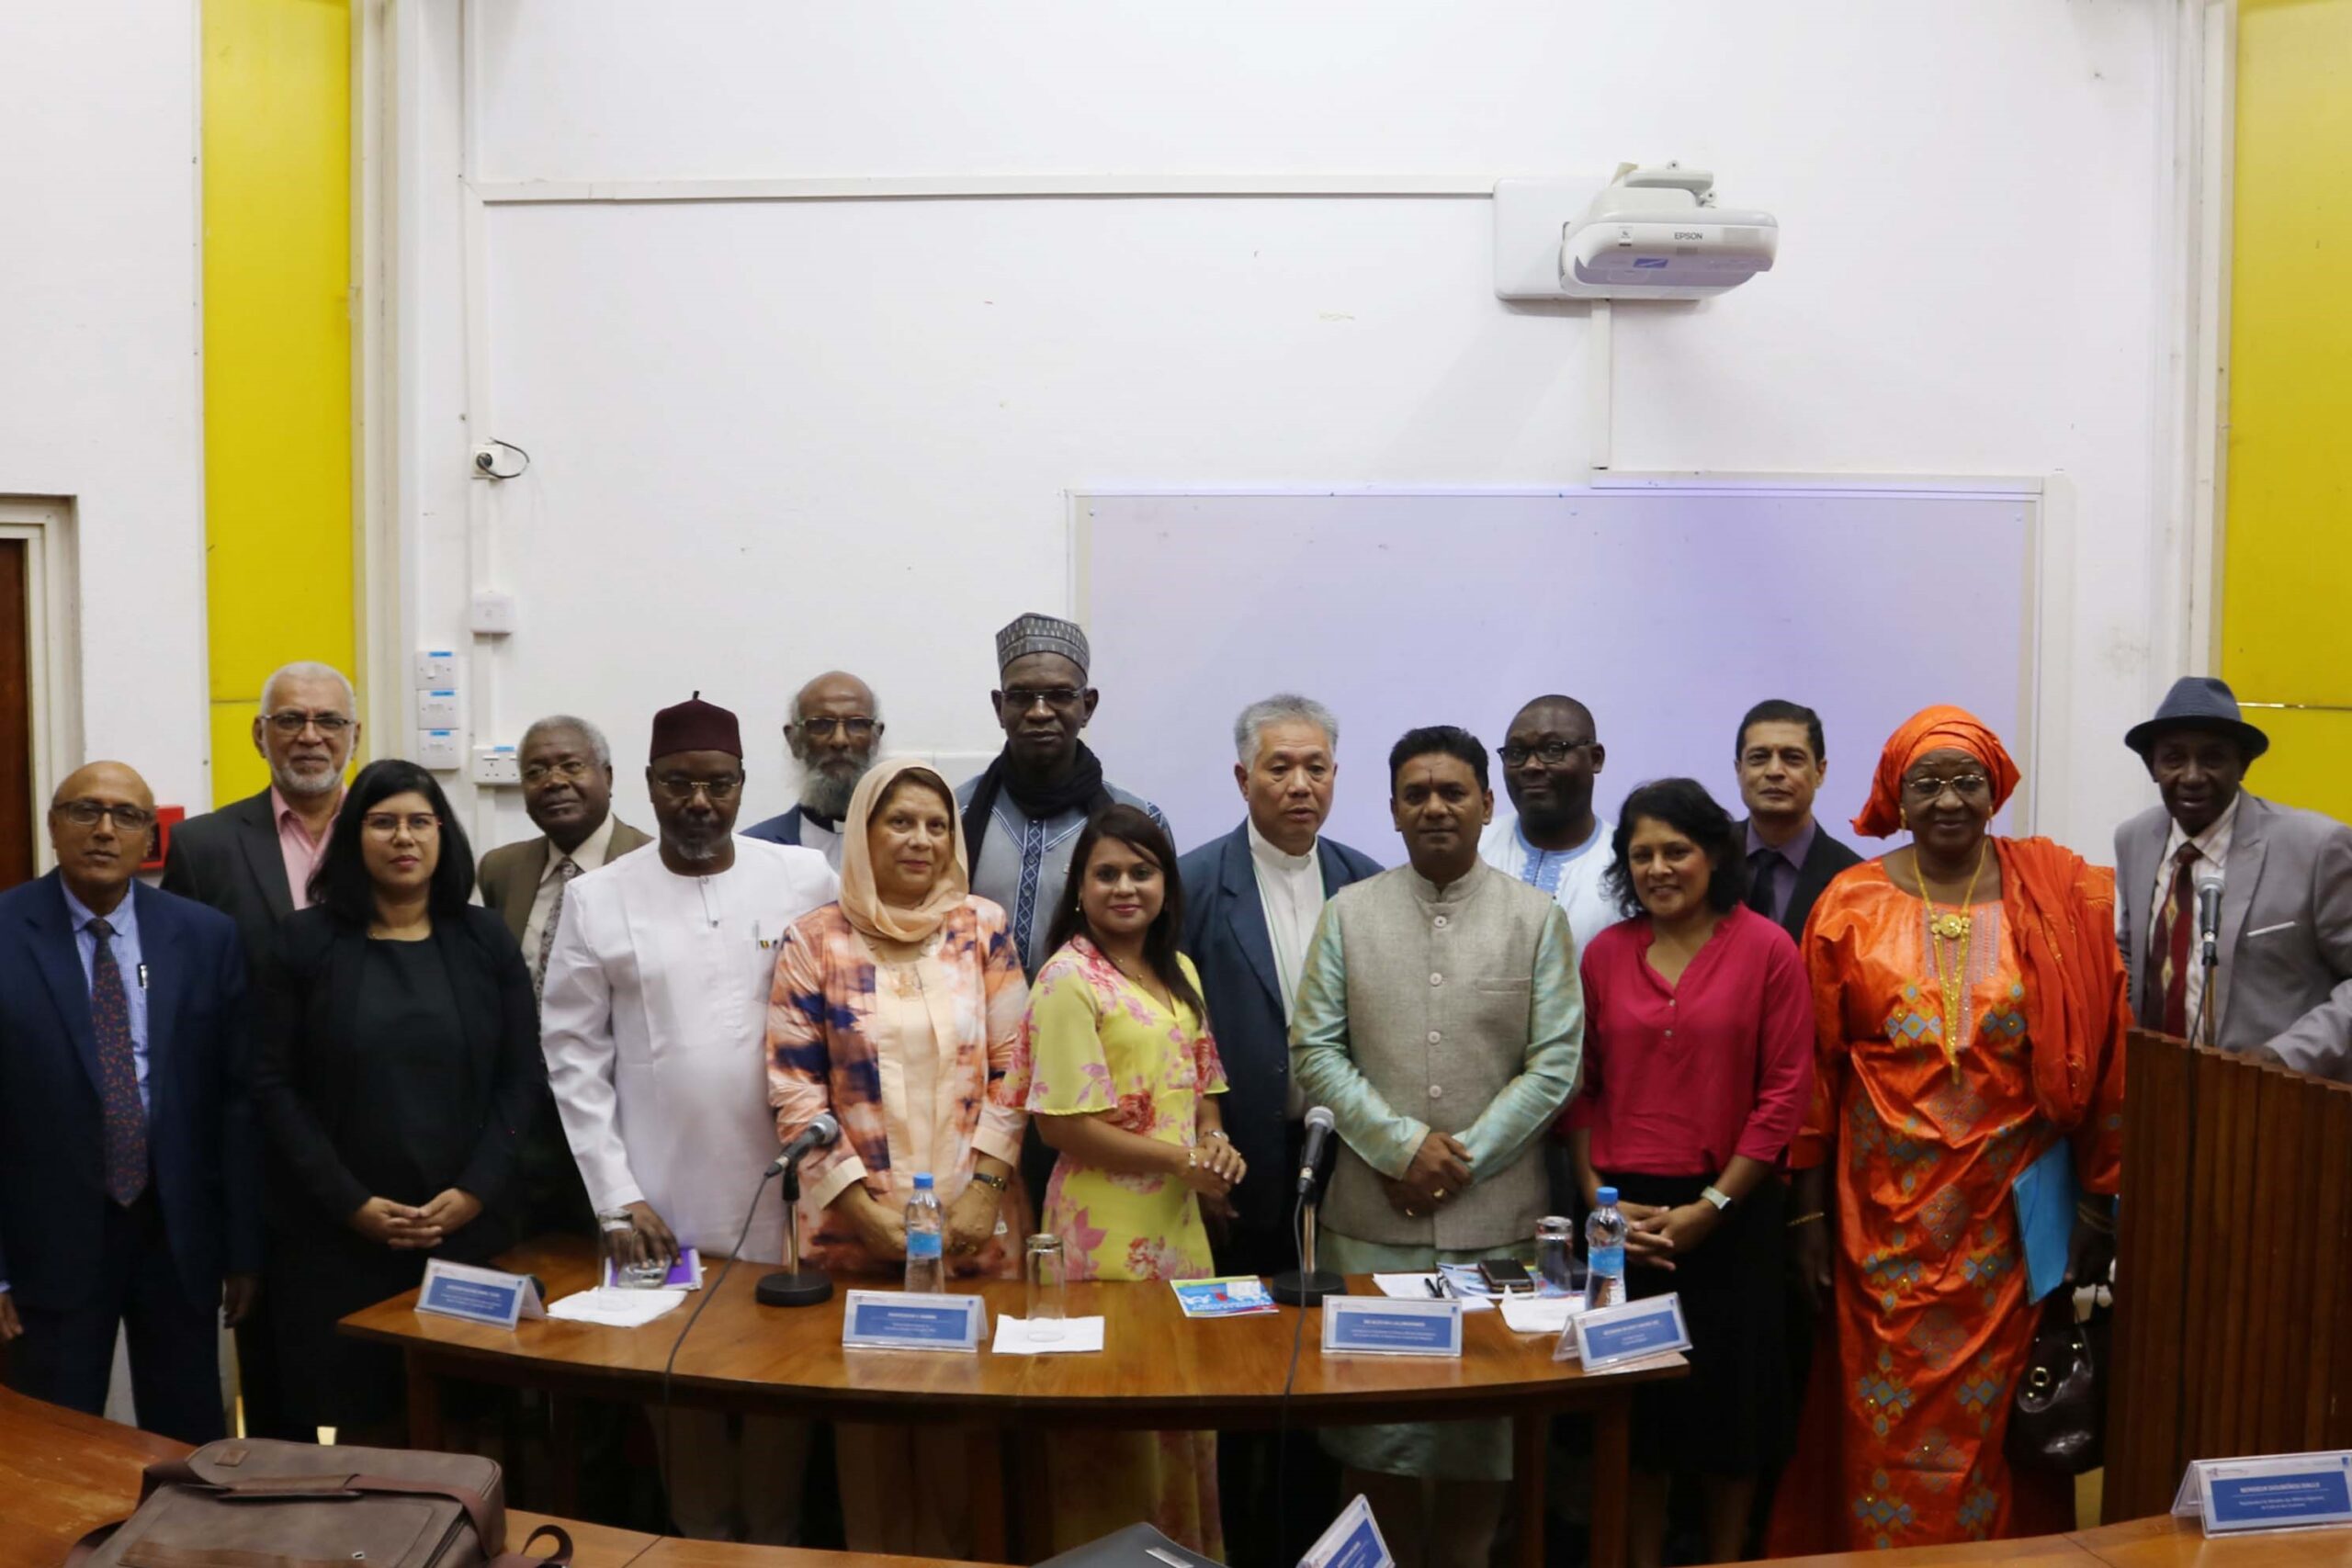 Forum on "L'importance des valeurs dans le combat contre la corruption" in collaboration with the Council of Religions and with the participation of a delegation from Mali